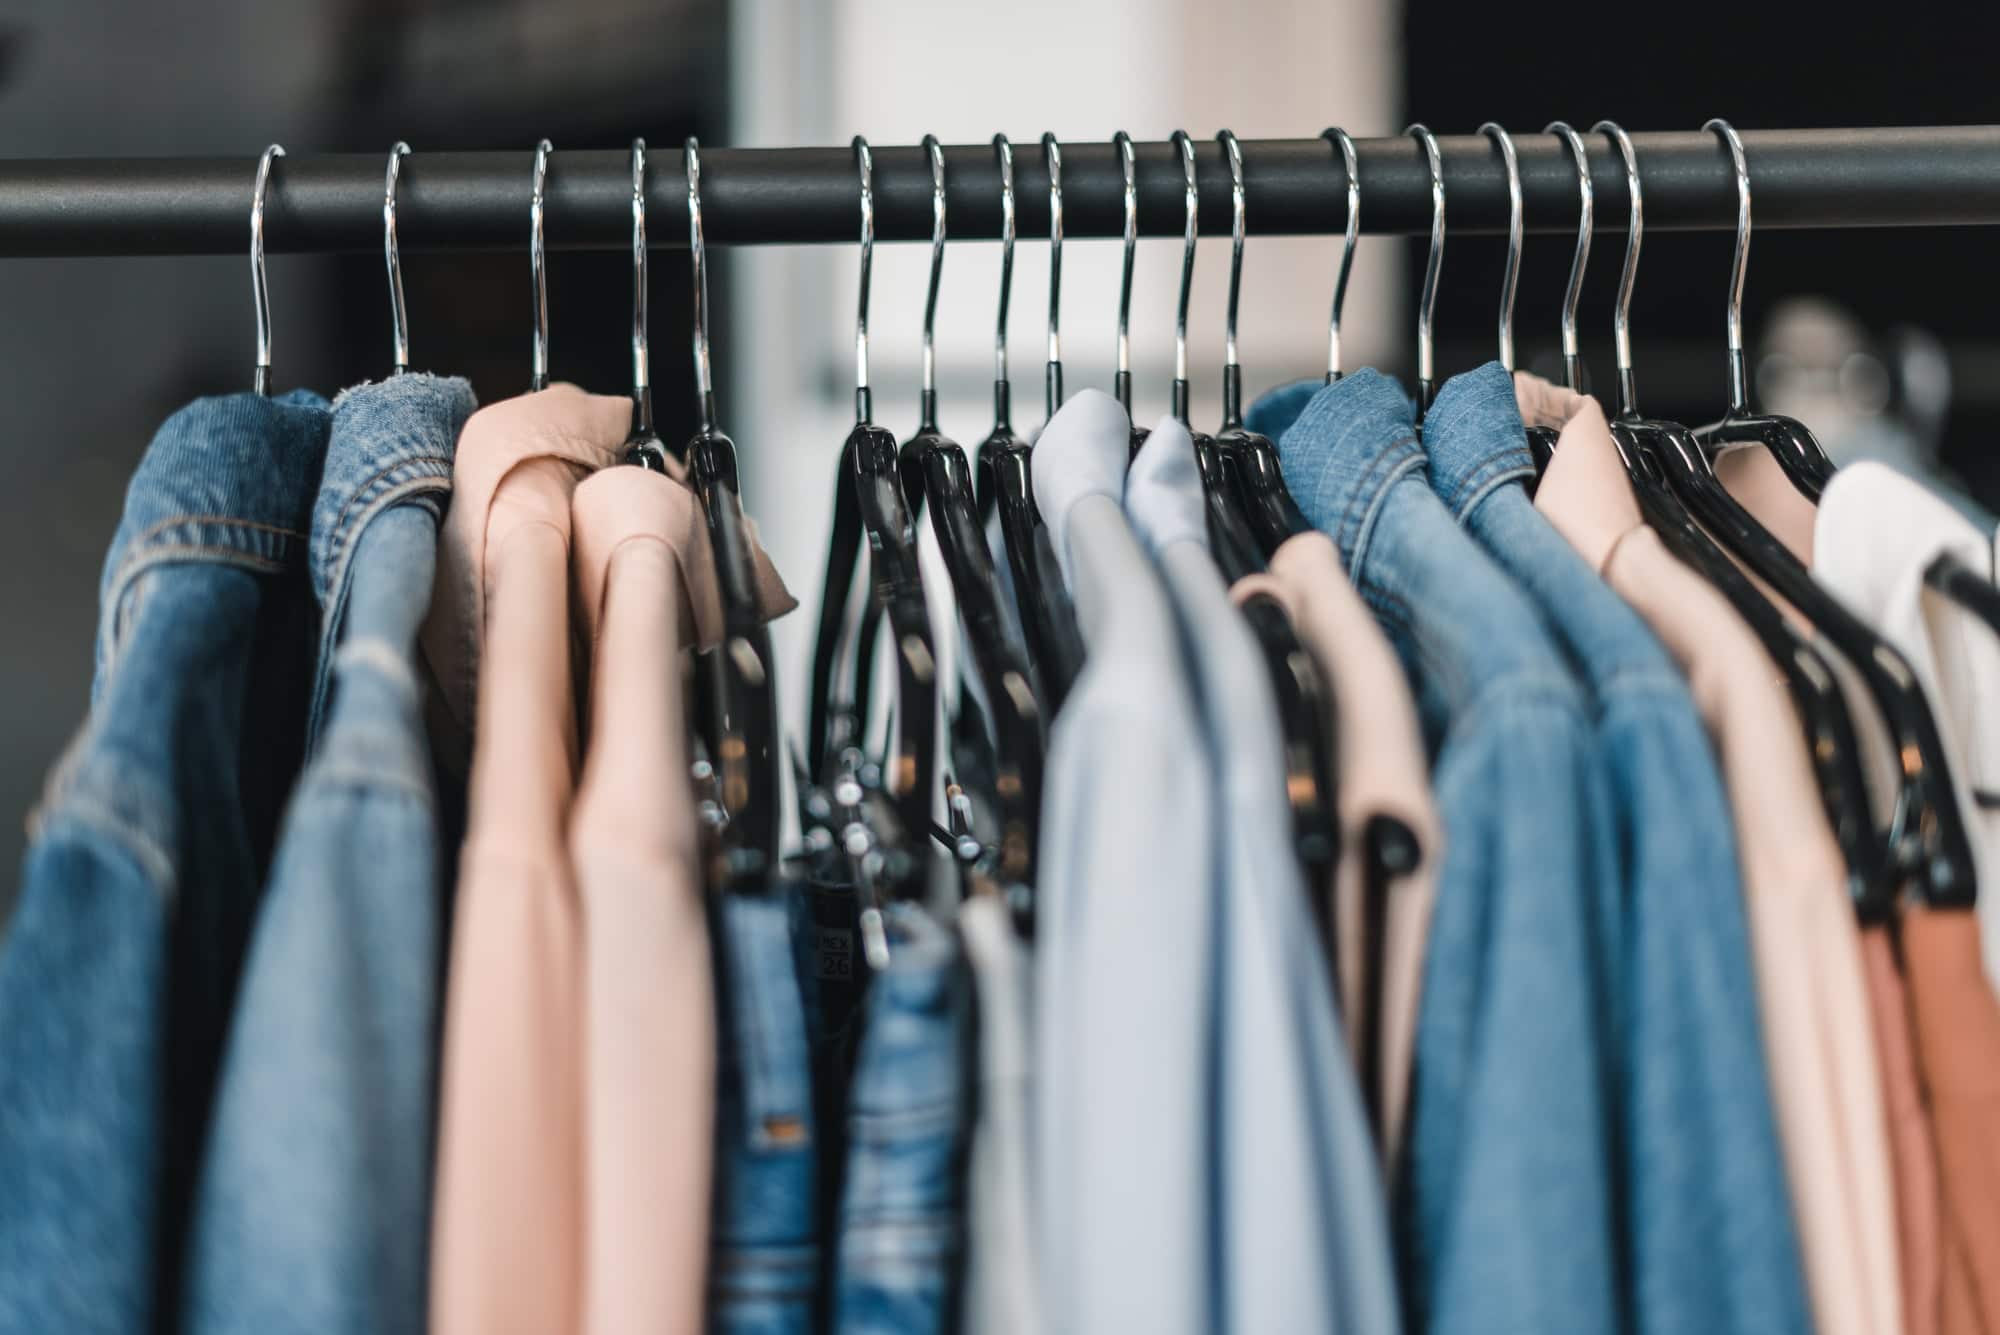 27 Best Consignment Stores Near Me And Online To Make Money